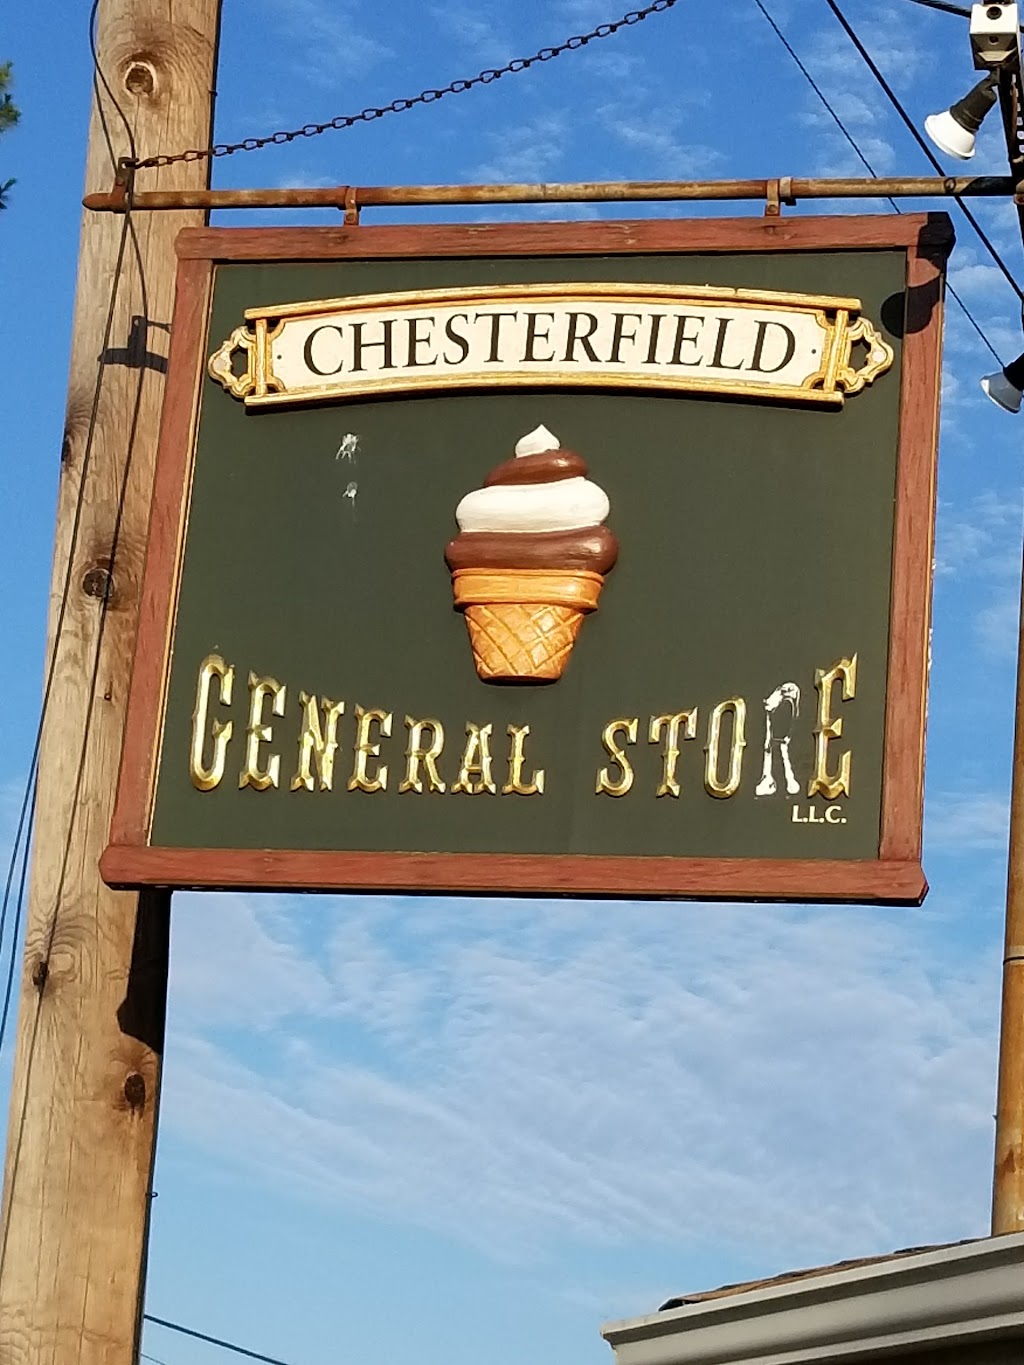 Chesterfield General Store | 2 Chesterfield Georgetown Rd, Chesterfield, NJ 08515 | Phone: (609) 291-5070